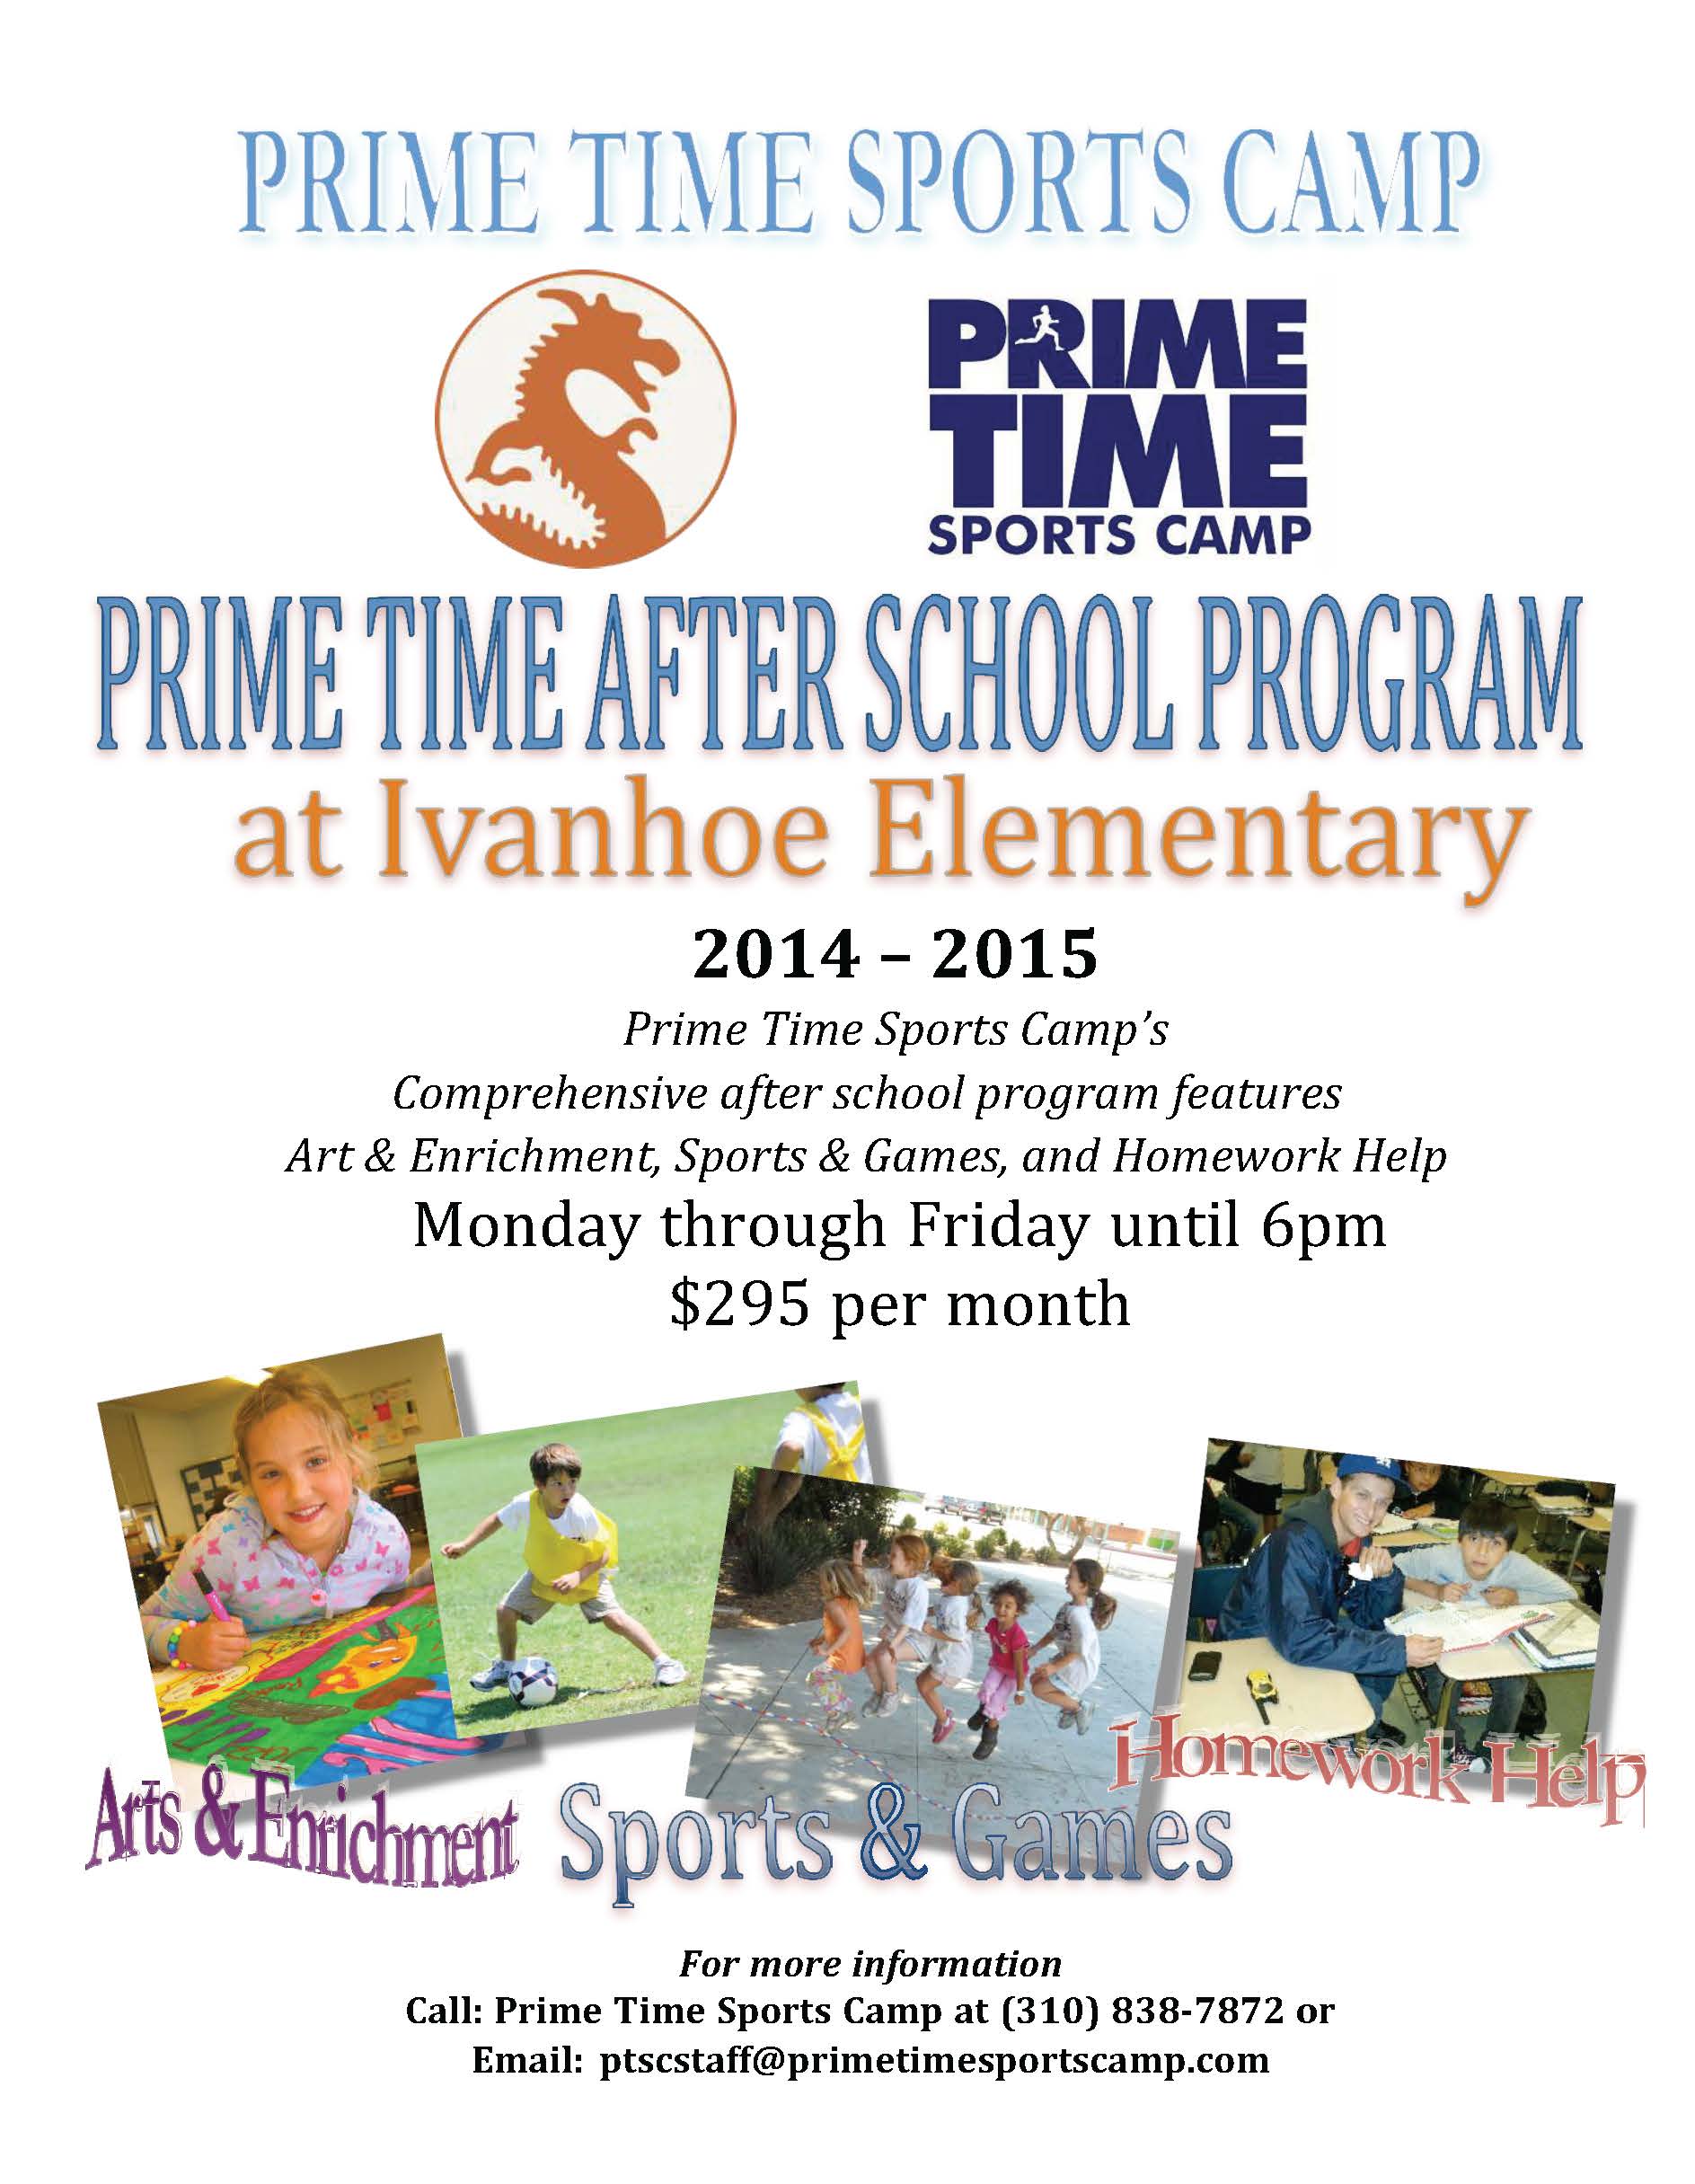 Ivanhoe Elementary Prime Time Sports Camp